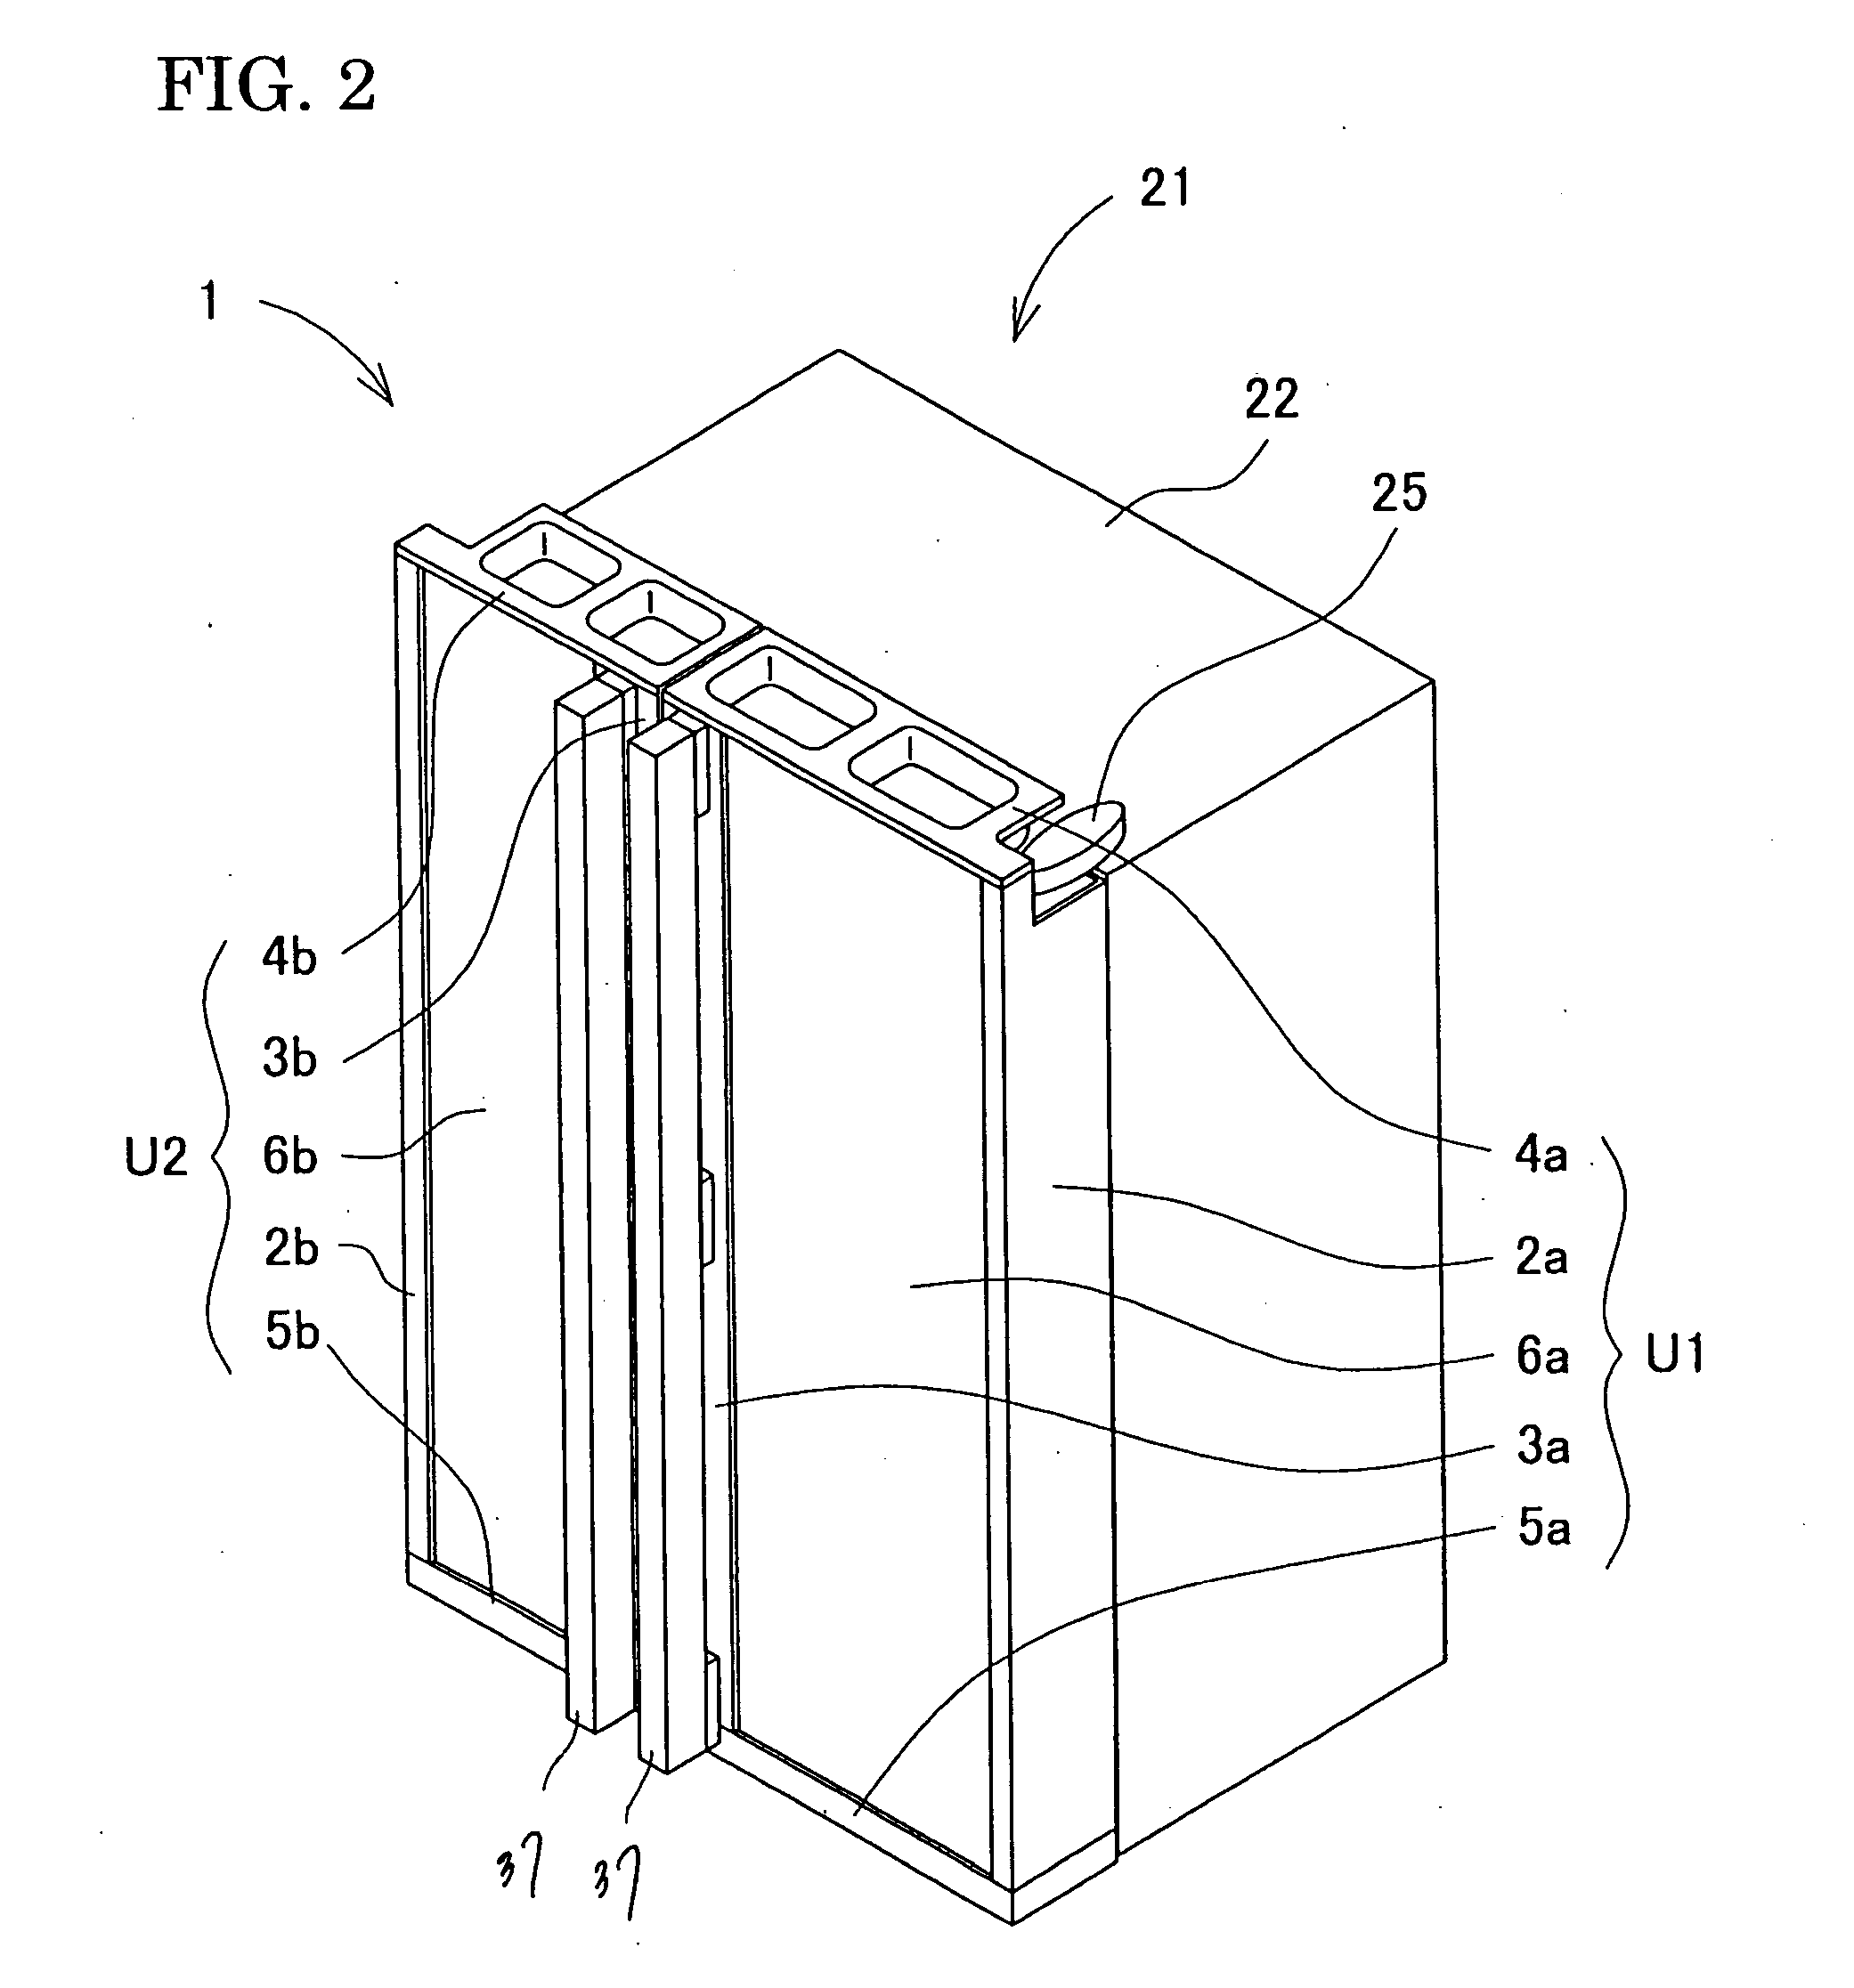 Cover panel unit for refrigerator